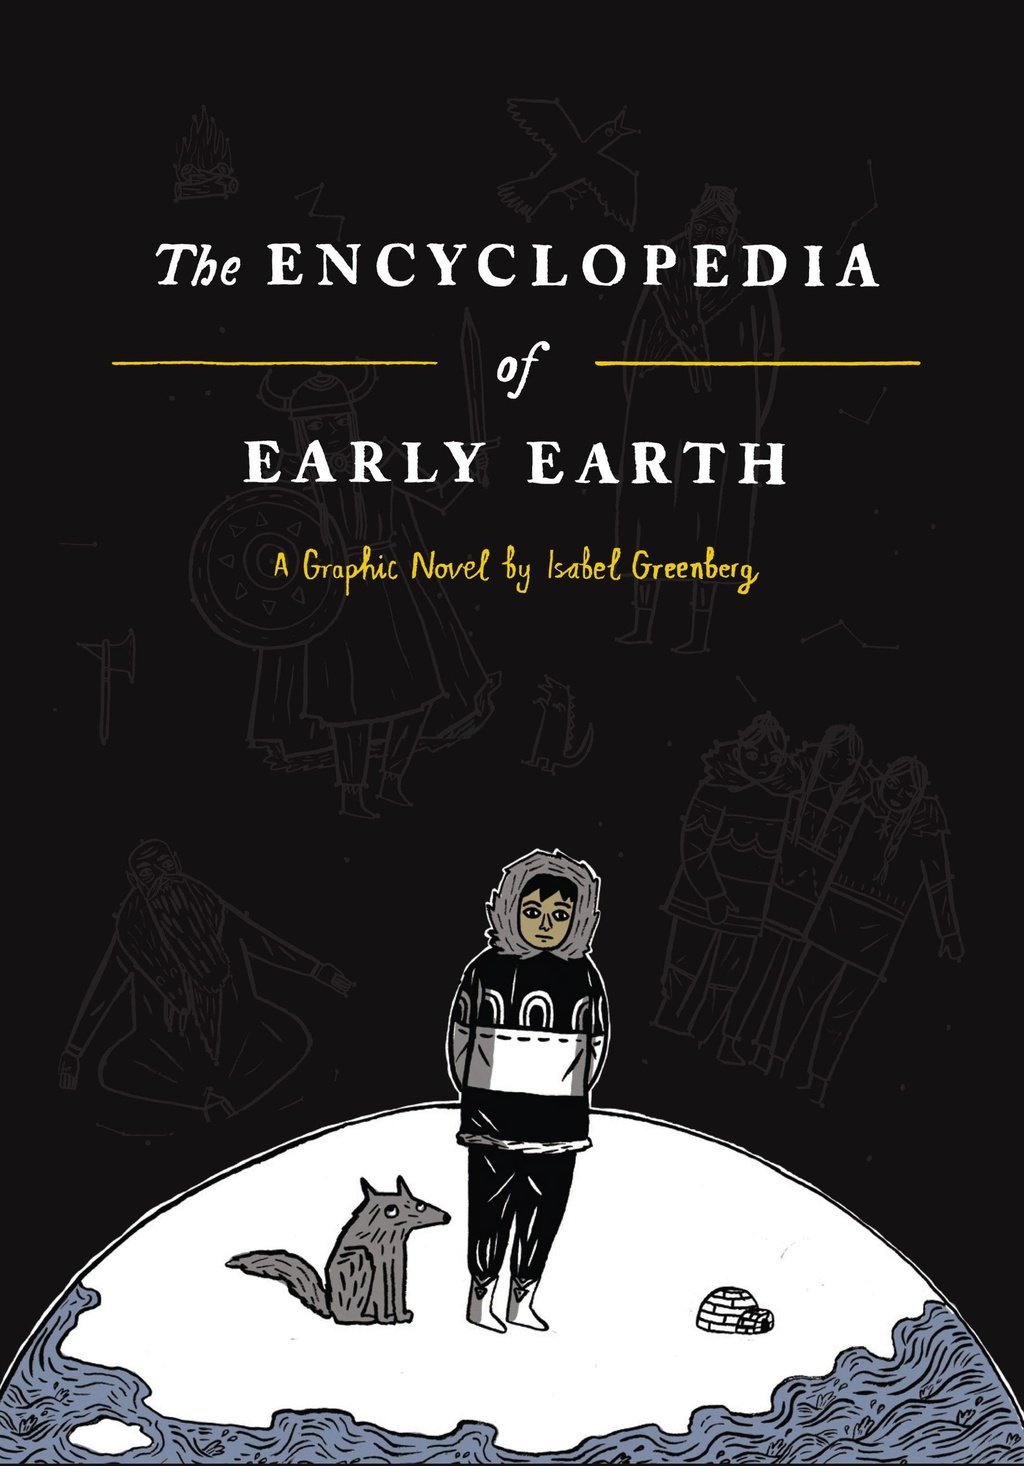 Cover image of graphic novel The Encyclopedia of Early Earth by Isabel Greenberg